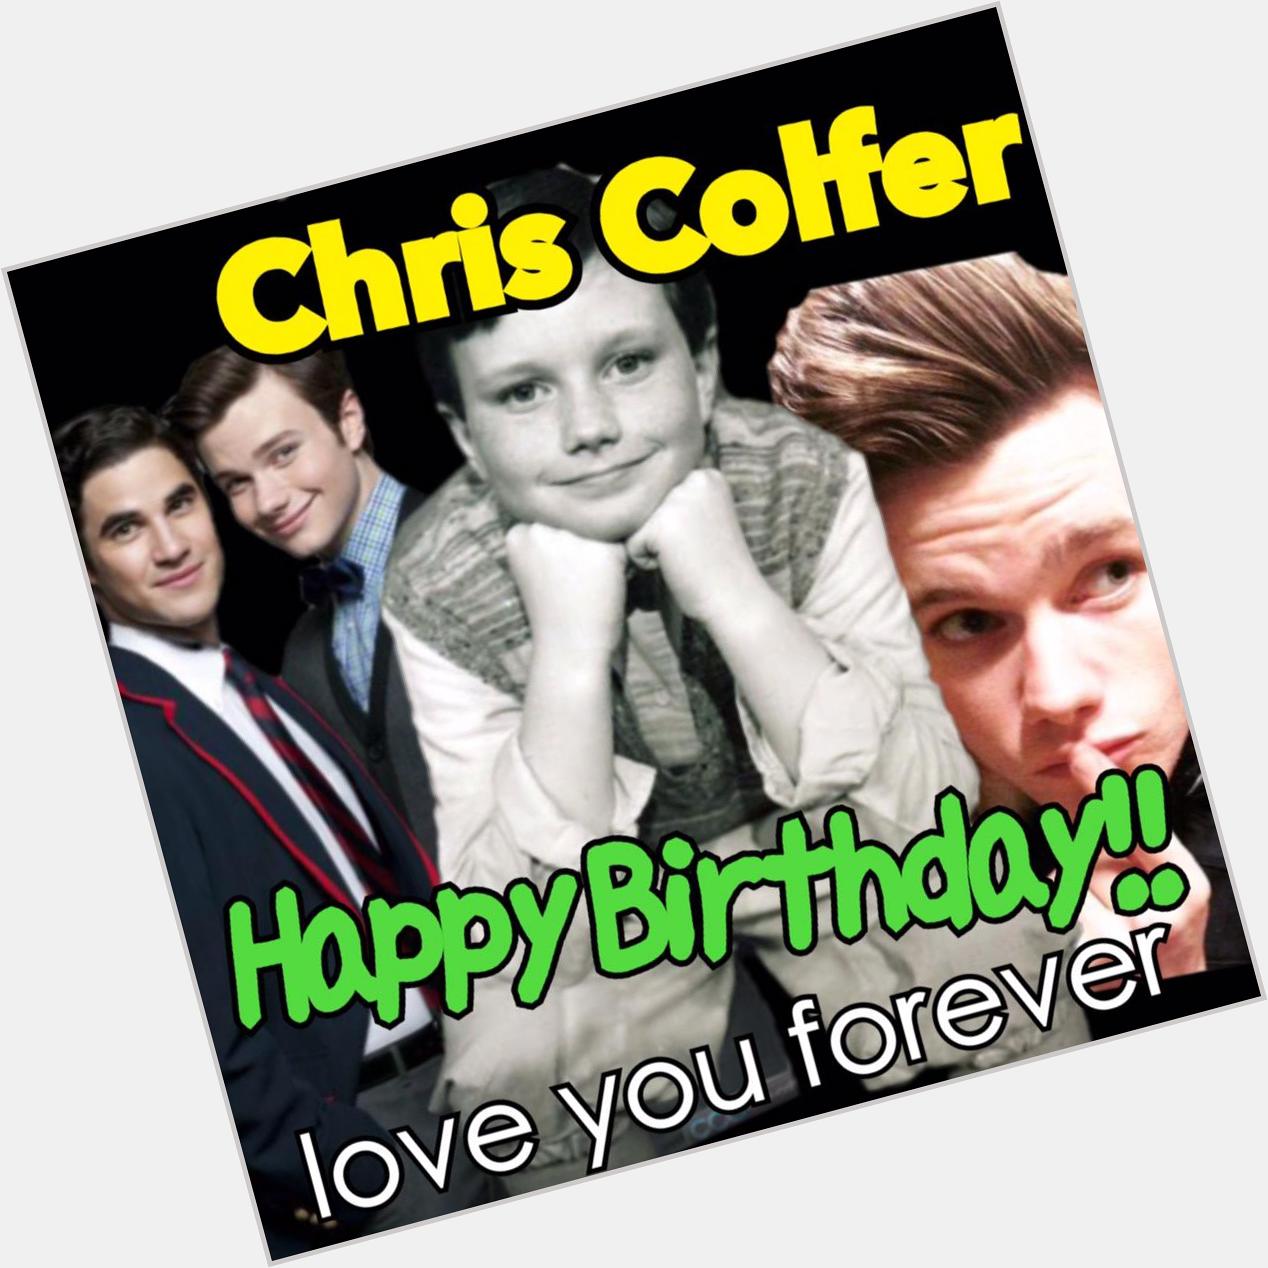  Happy Birthday Chris Colfer!!!
I love your character, singing voice.
I\m a lover...
Love you Chris   